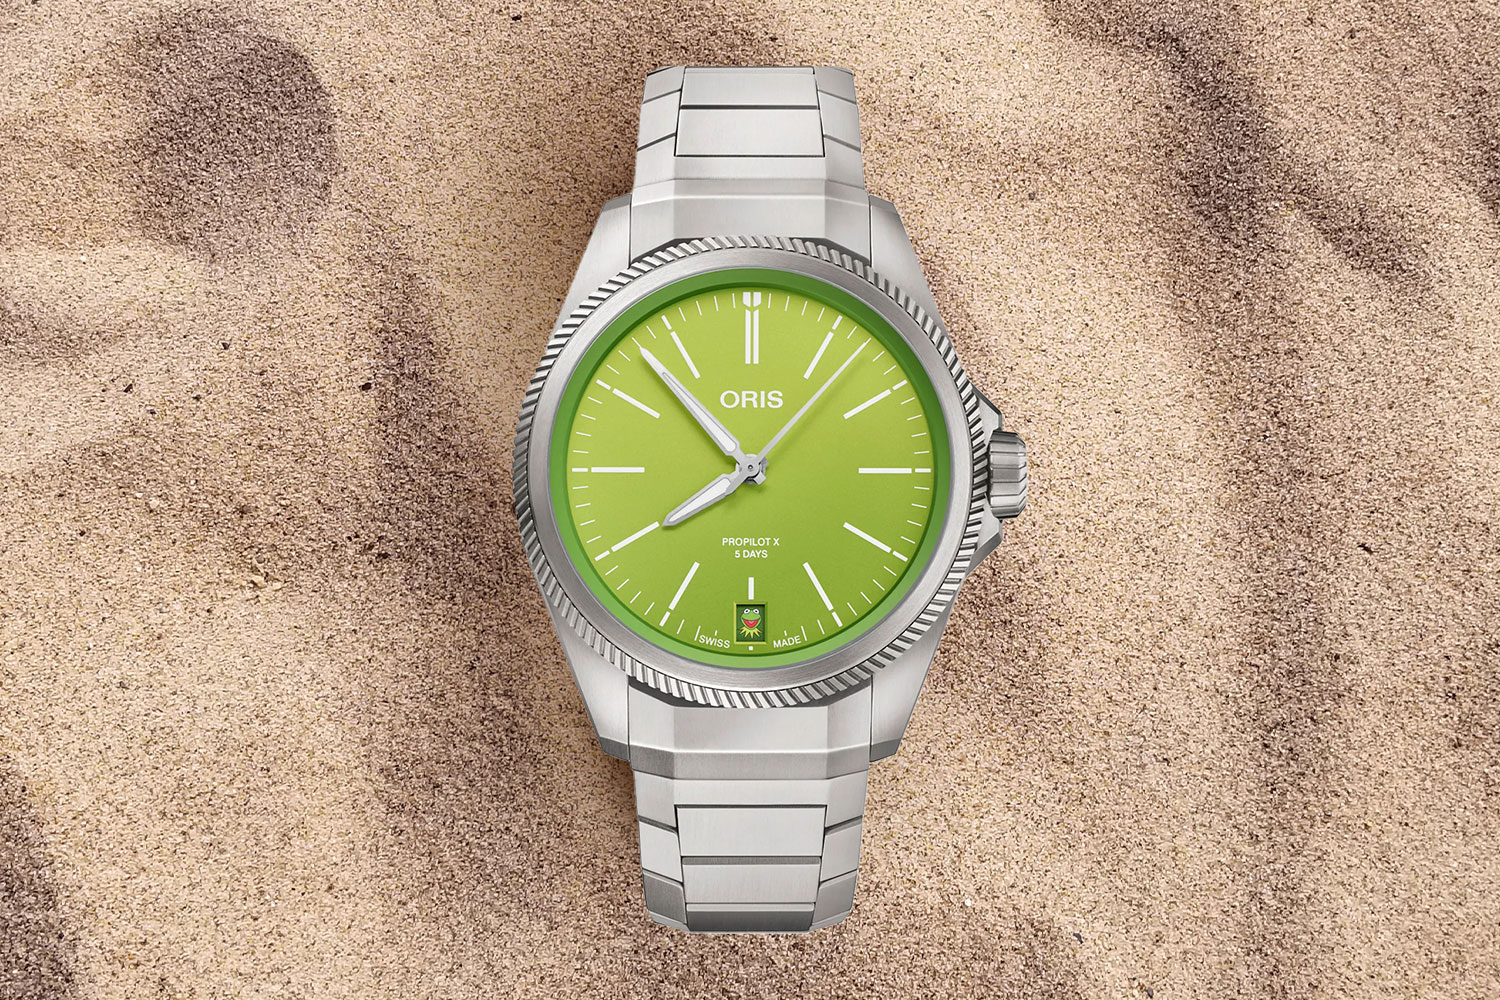 Silver watch with green face in the sand.